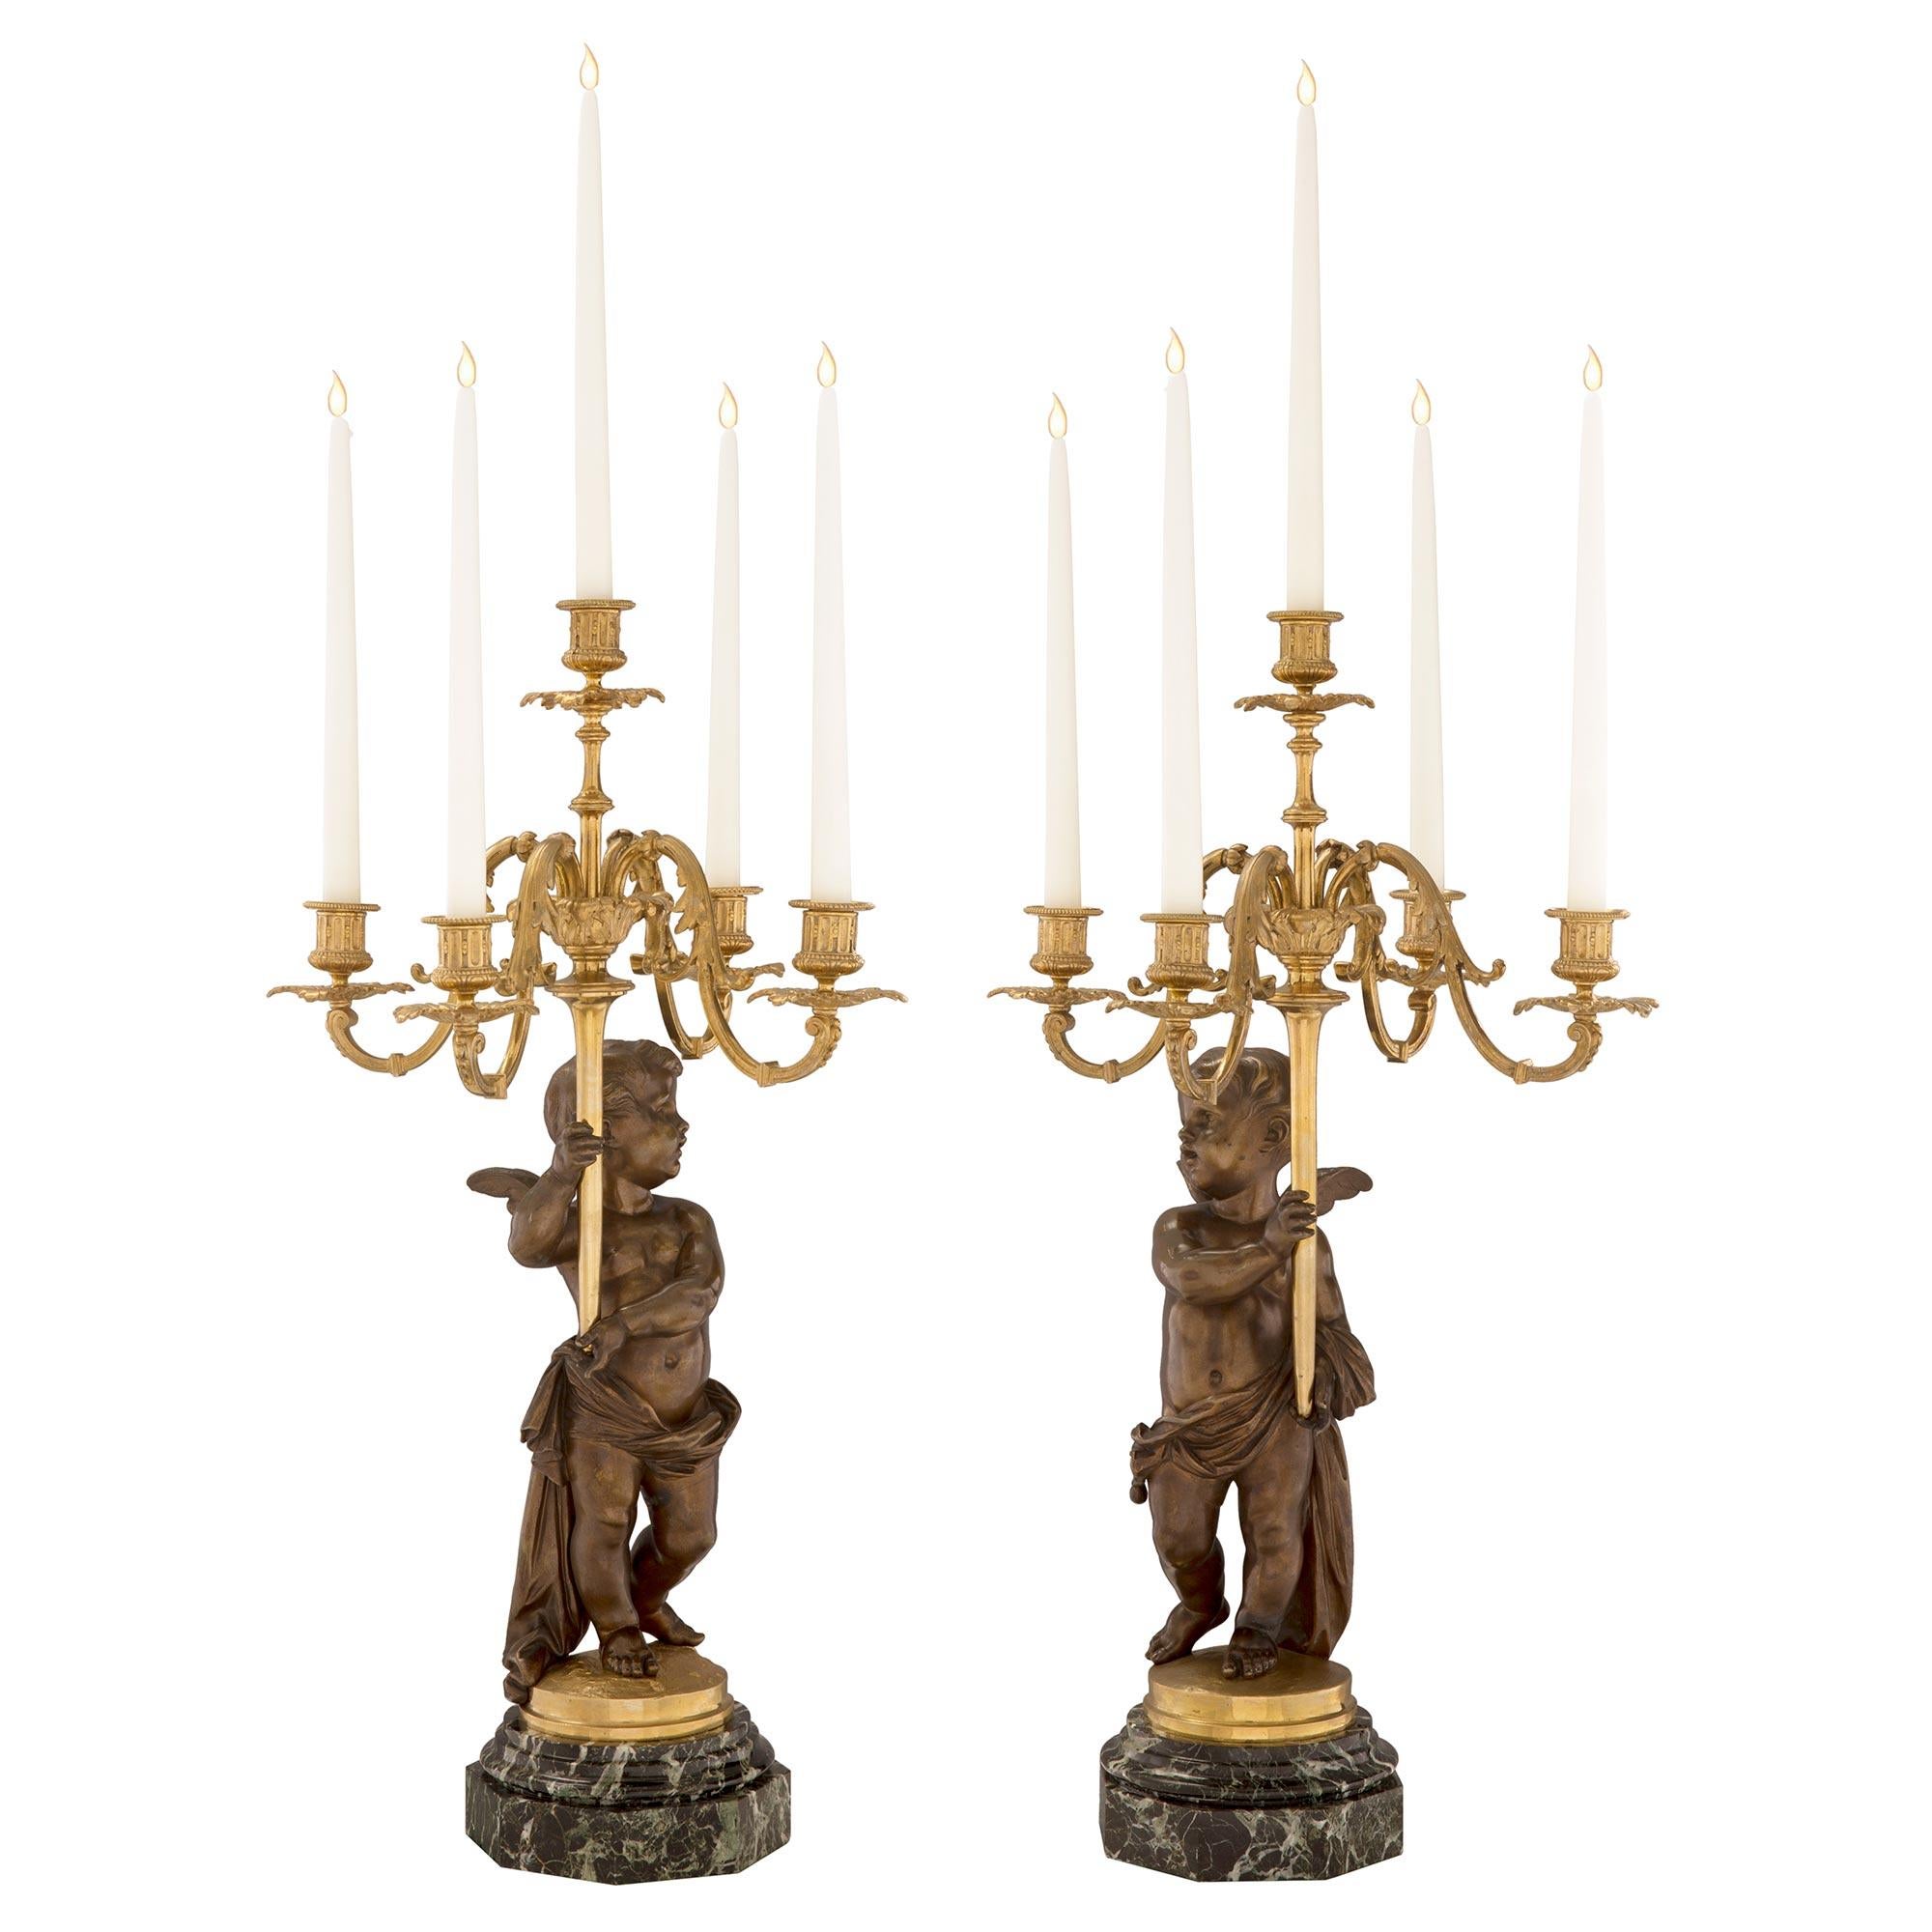 Pair of French 19th Century Louis XVI Style Winged Cherub Candelabras In Good Condition For Sale In West Palm Beach, FL